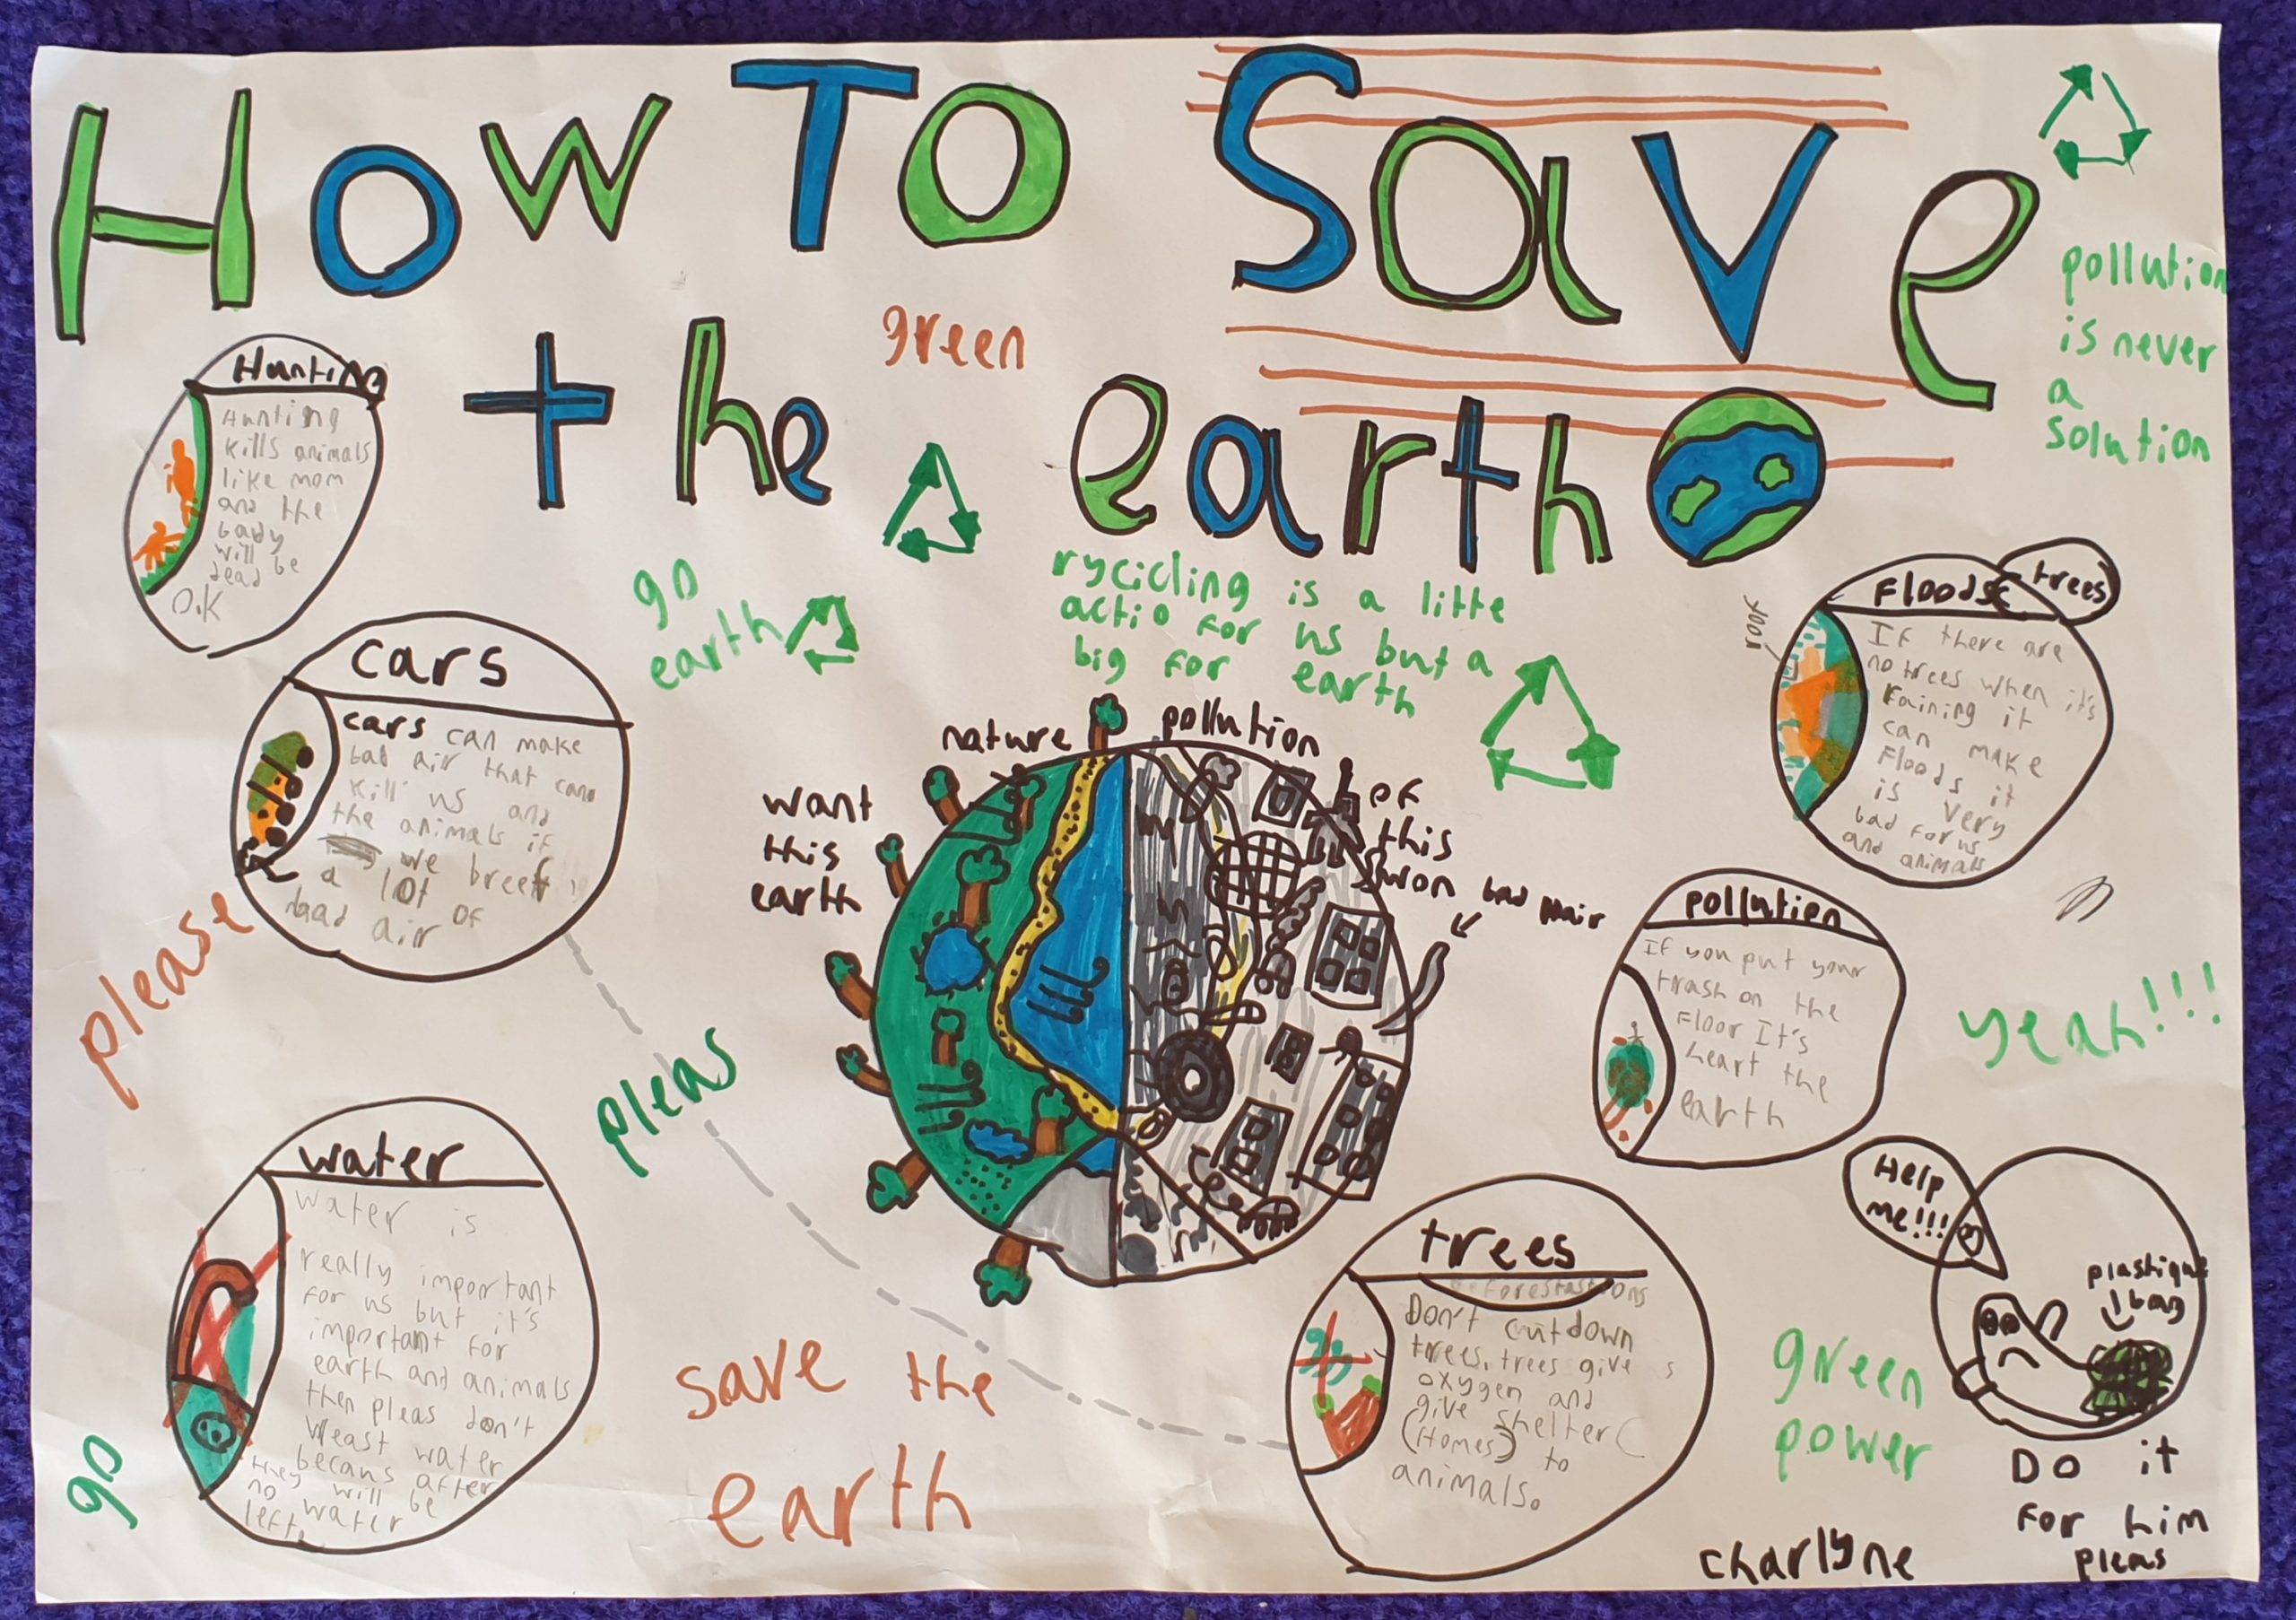 How to save the earth